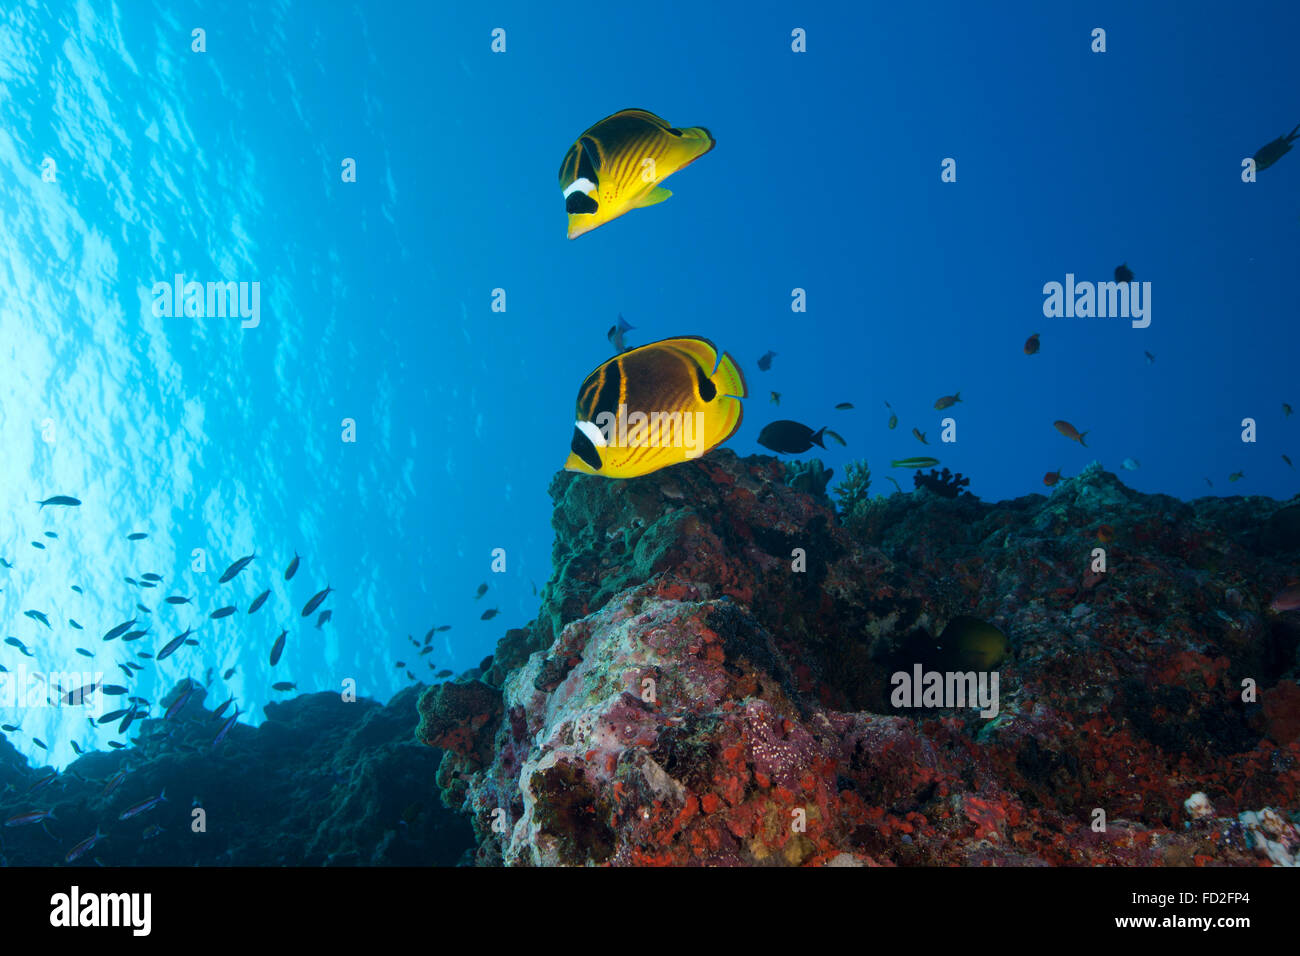 A pair of racoon butterflyfish (Chaetodon lunula) swimming in Fiji waters. Stock Photo